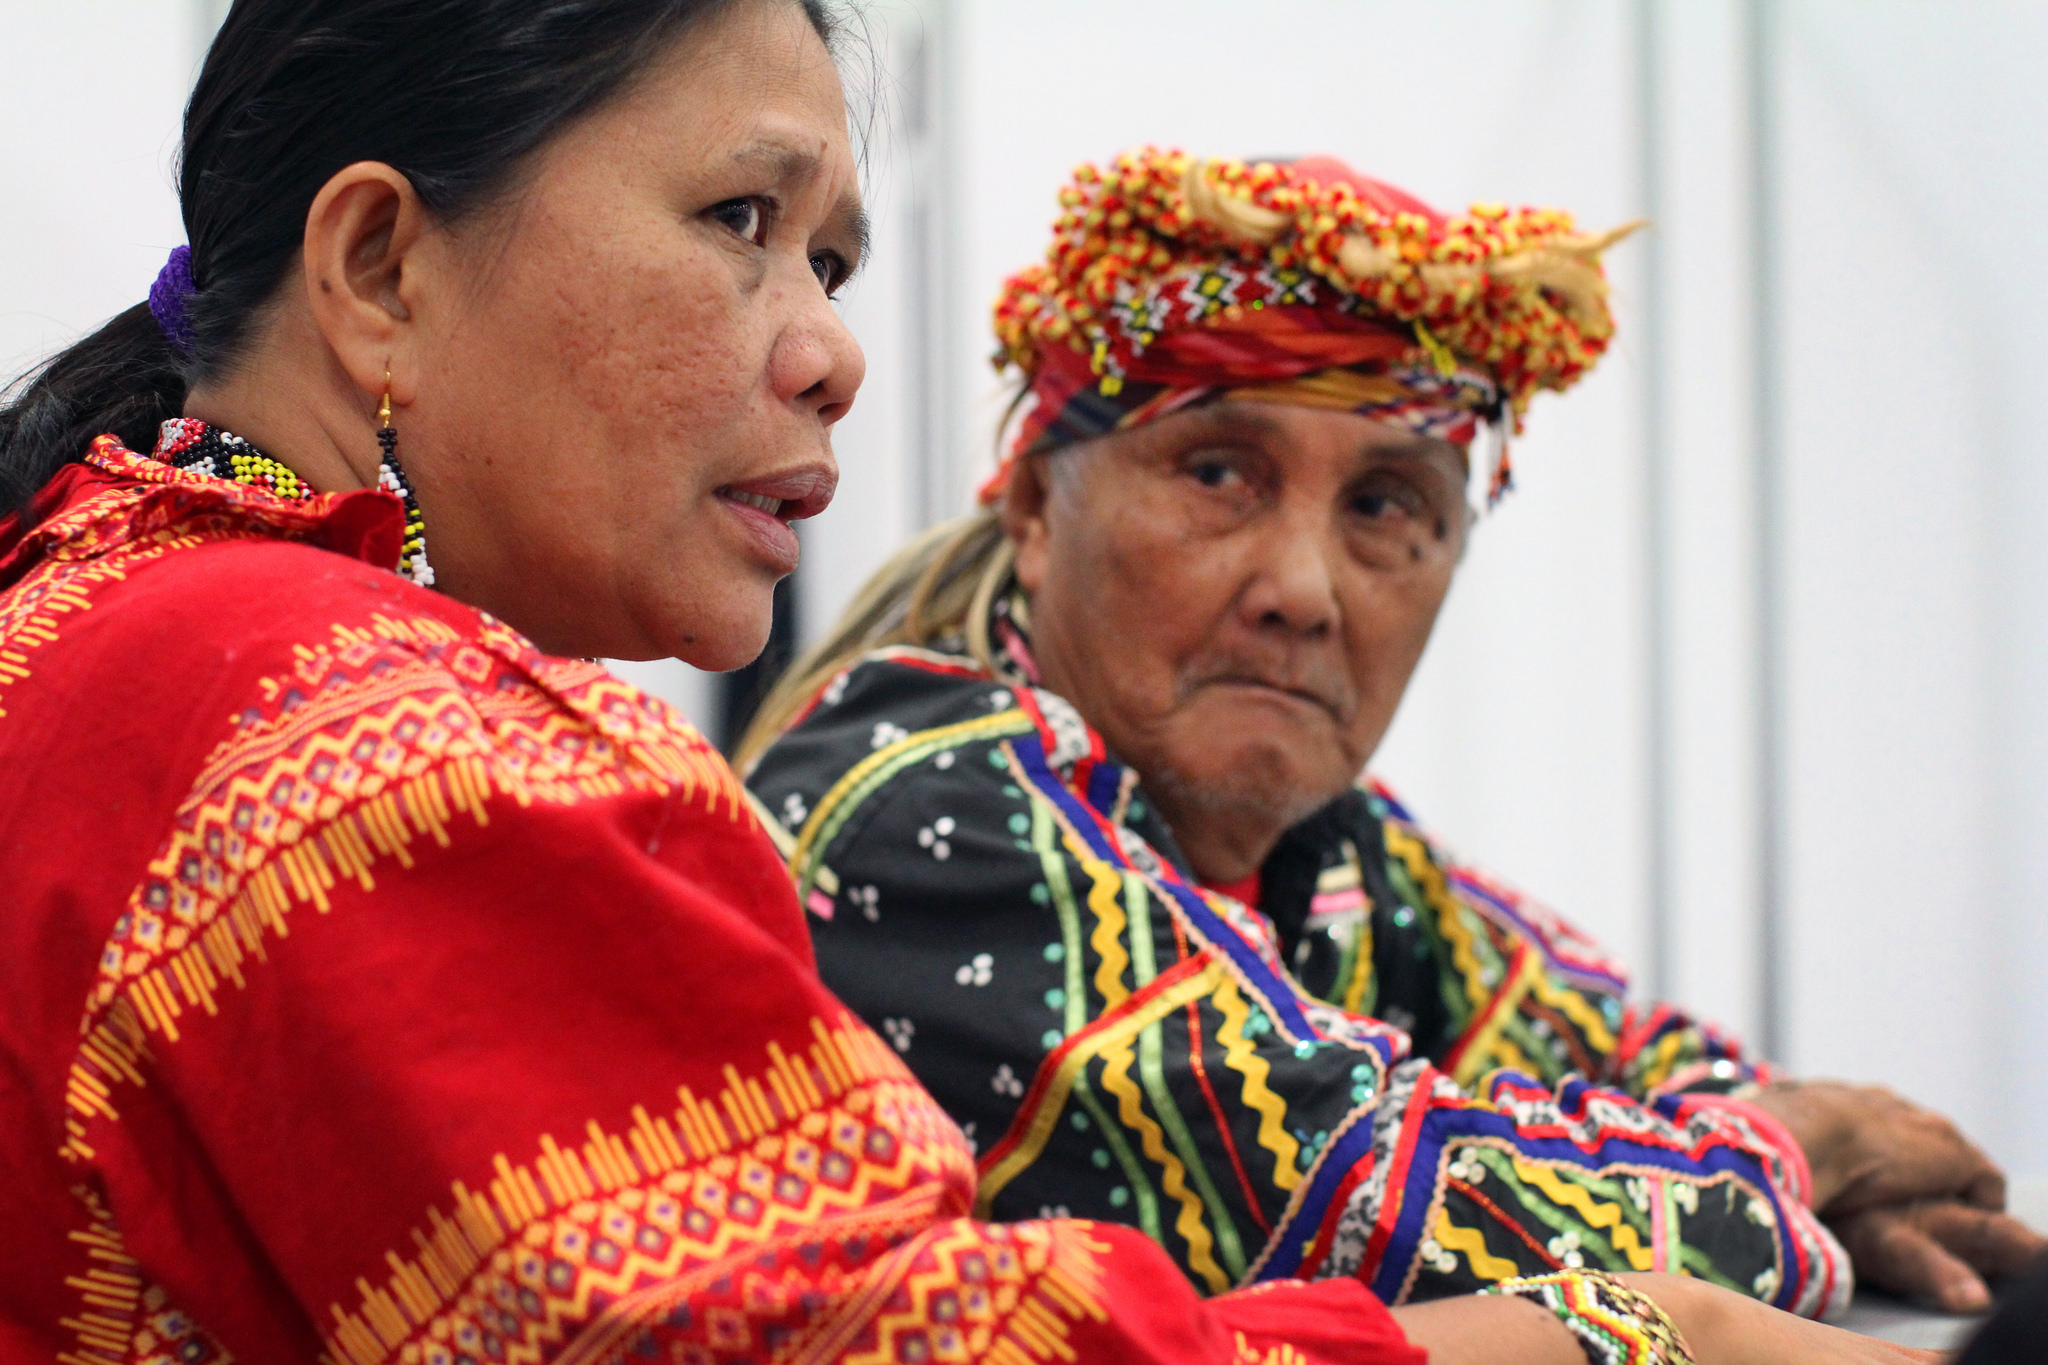 Norma Capuyan and Monico Cayon, indigenous leaders from the island of Mindanao in the southern Philippines, answer questions in the news area at the 2016 United Methodist General Conference at the Oregon Convention Center in Portland. Both shared experiences of discrimination and are part of the Lakbay Lumad USA tour.  Photo by Kathleen Barry, UMNS.